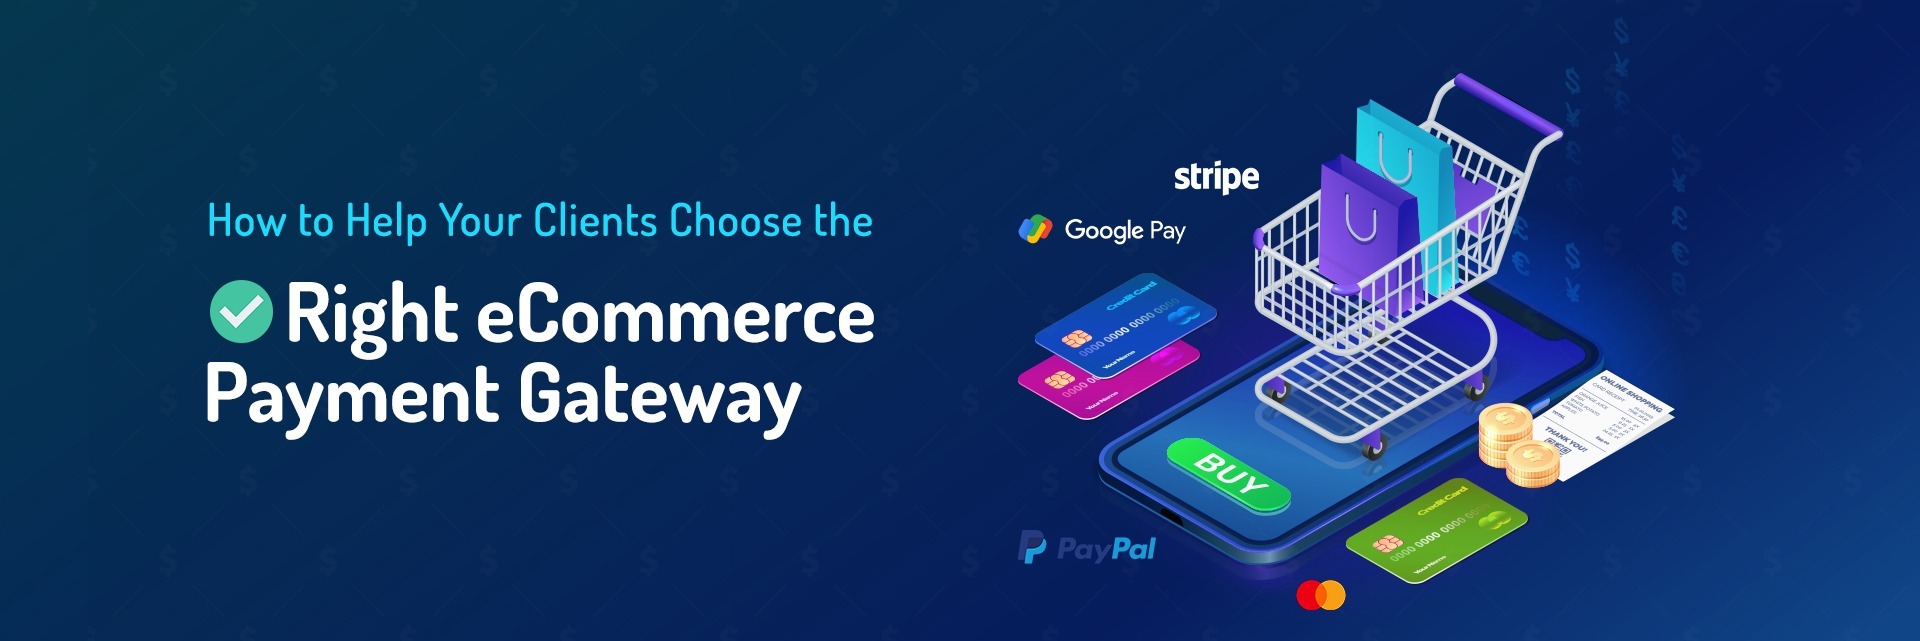 How to Help Your Clients Choose the Right eCommerce Payment Gateway?